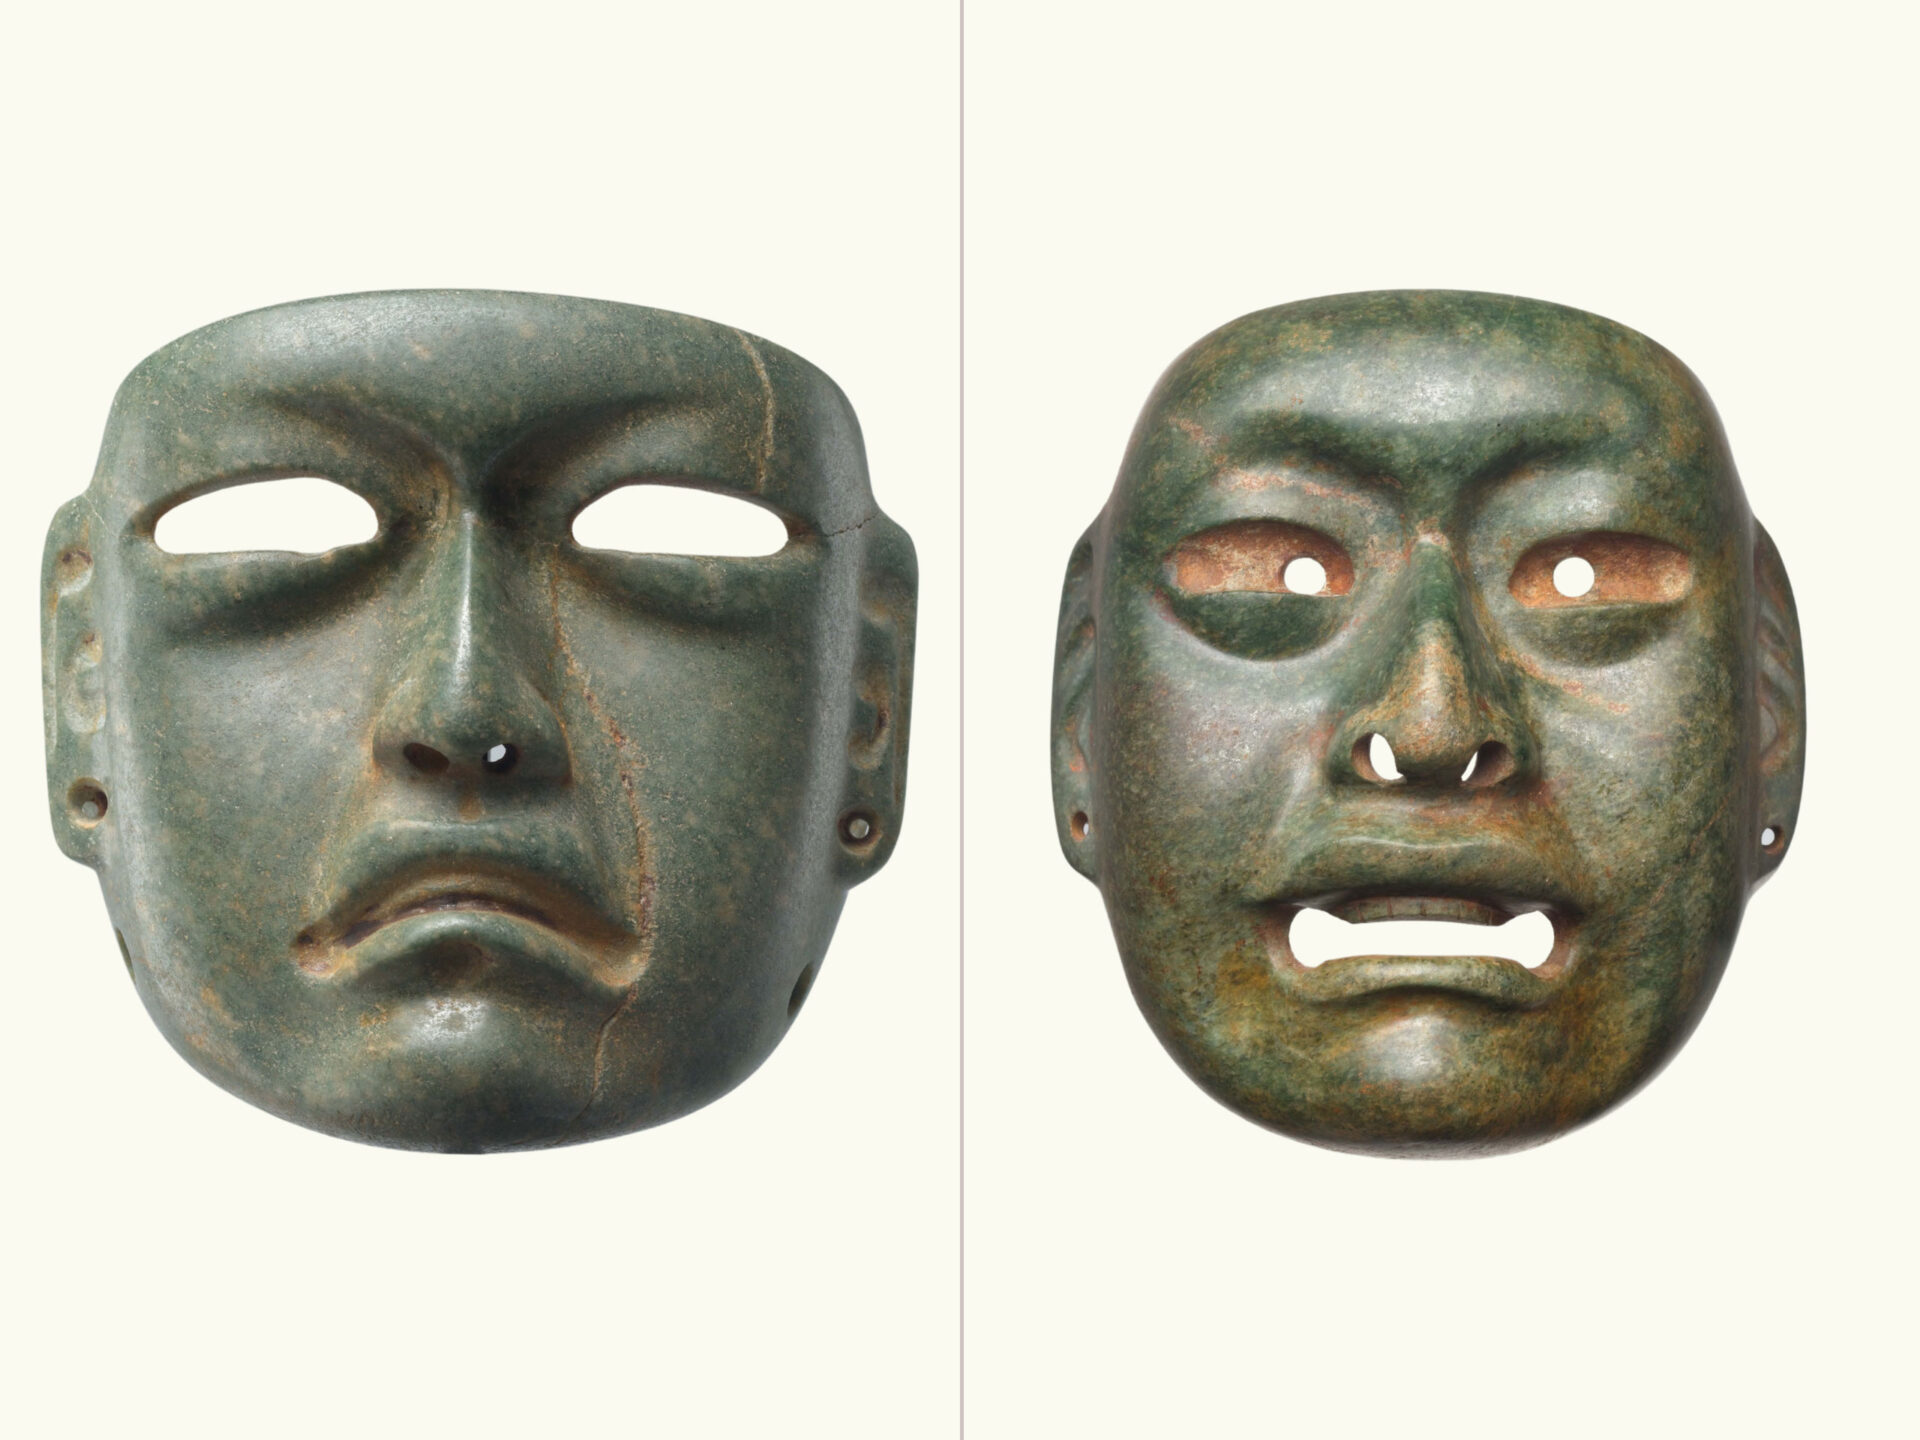 A comparison of two green masks: face with defined nose and space for eyes (left) and defined face with holes for pupils, nostrils and mouth (right).